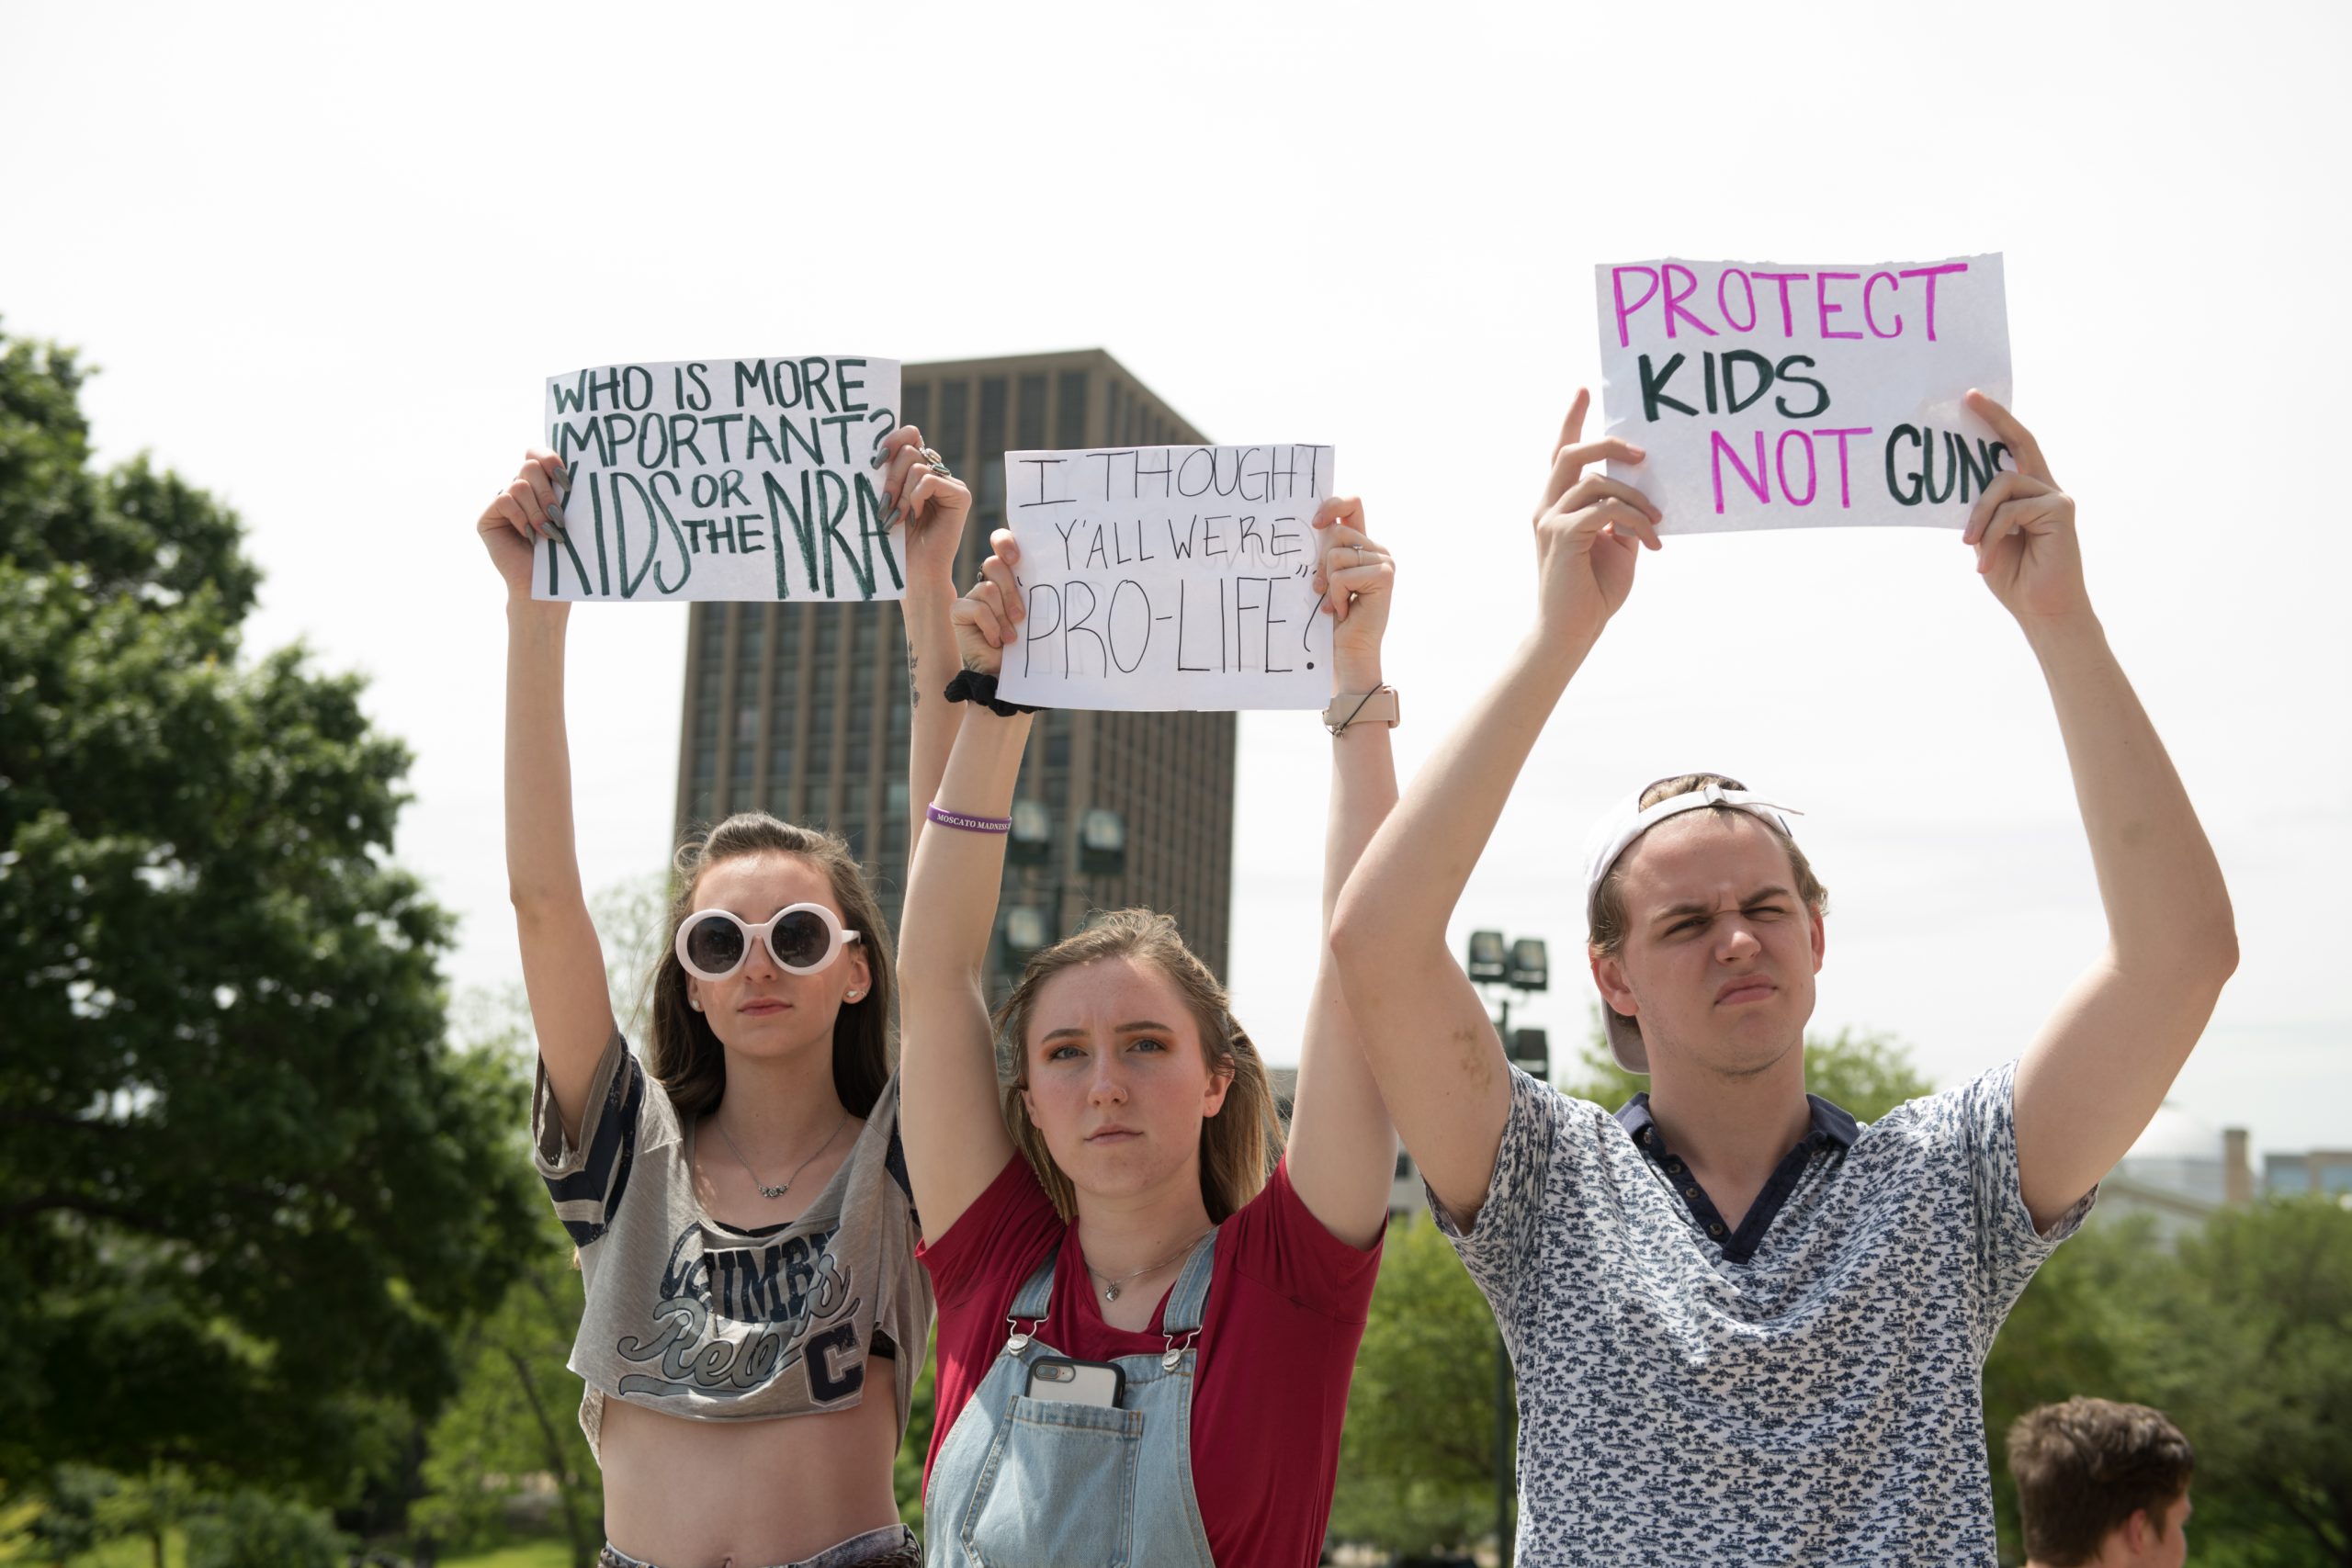 April 20, 2018 - Three students with a banners protesting gun violence join thousands of fellow students gathered at the Texas State Capitol in Austin on the 19th anniversary of the Columbine High School massacre. (Credit Image: © Sandy Carson via ZUMA Wire)